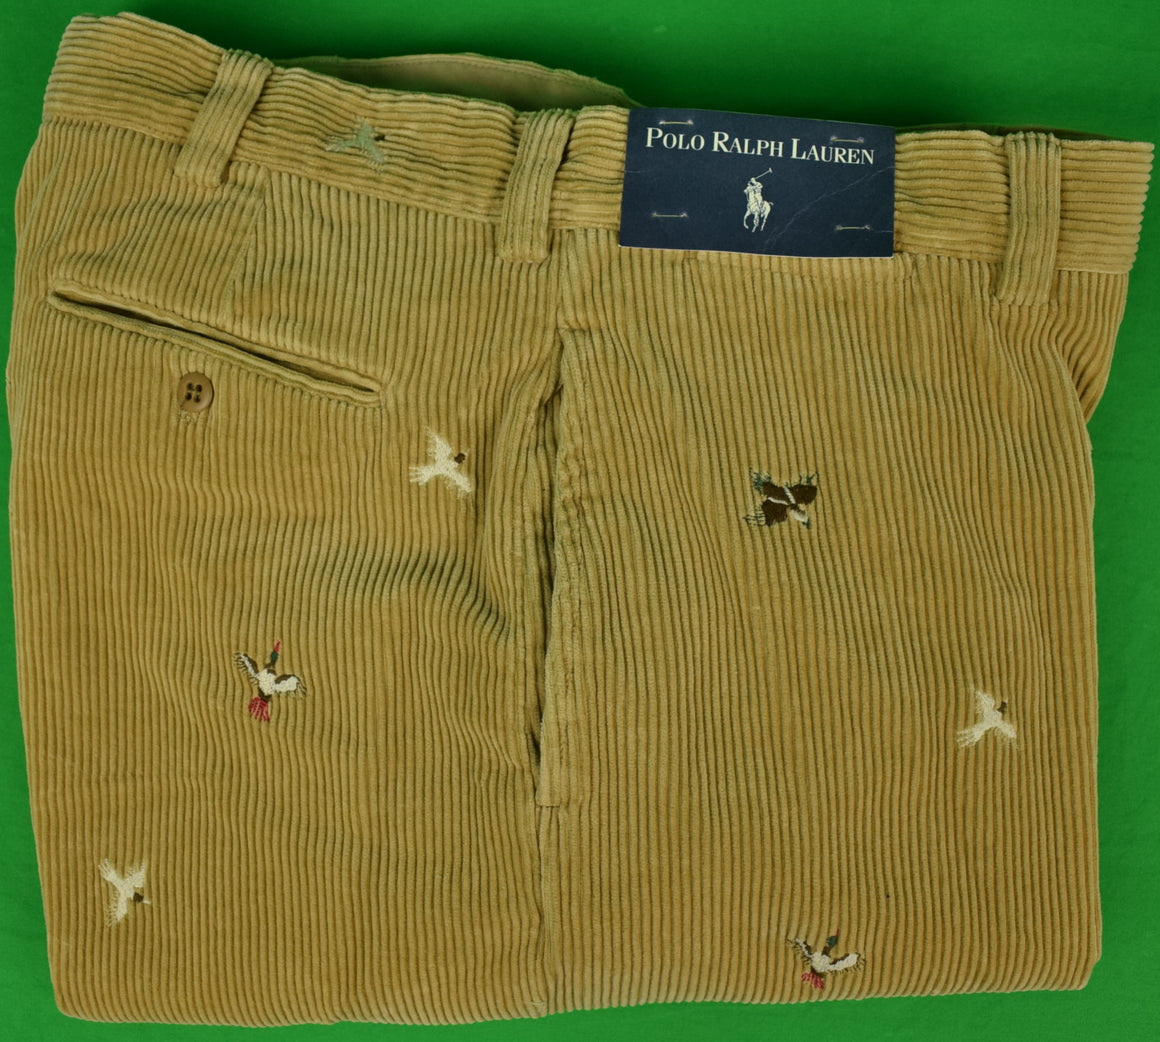 "Polo Ralph Lauren Wide Wale Tan Corduroy Embroidered Game Bird Pants" Sz 36L (New w/ RL Tag!)